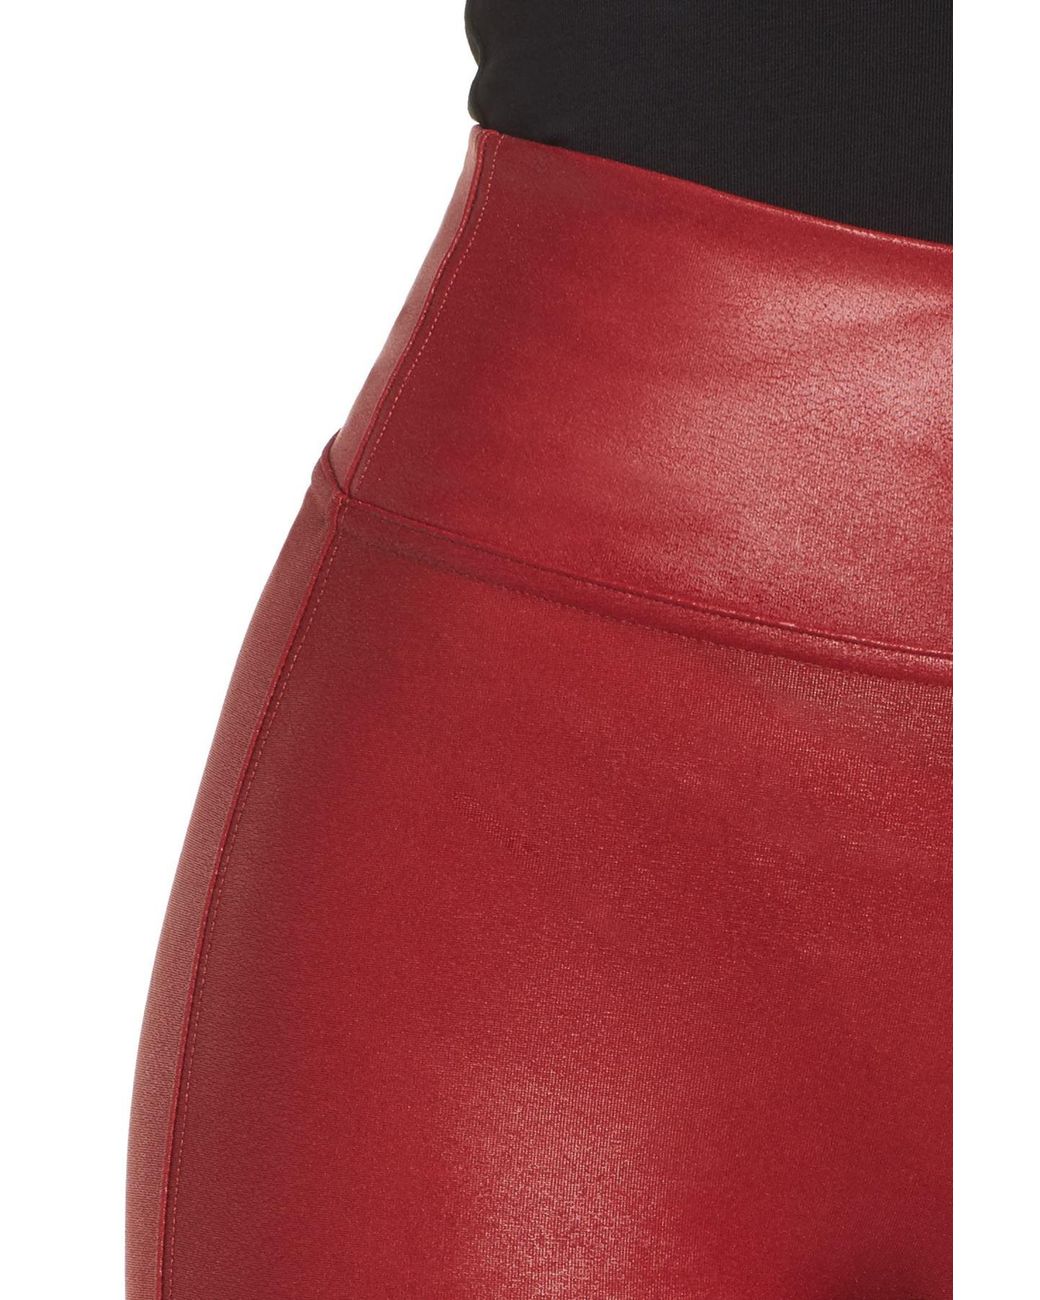 Spanx (r) Faux Leather Leggings in Red